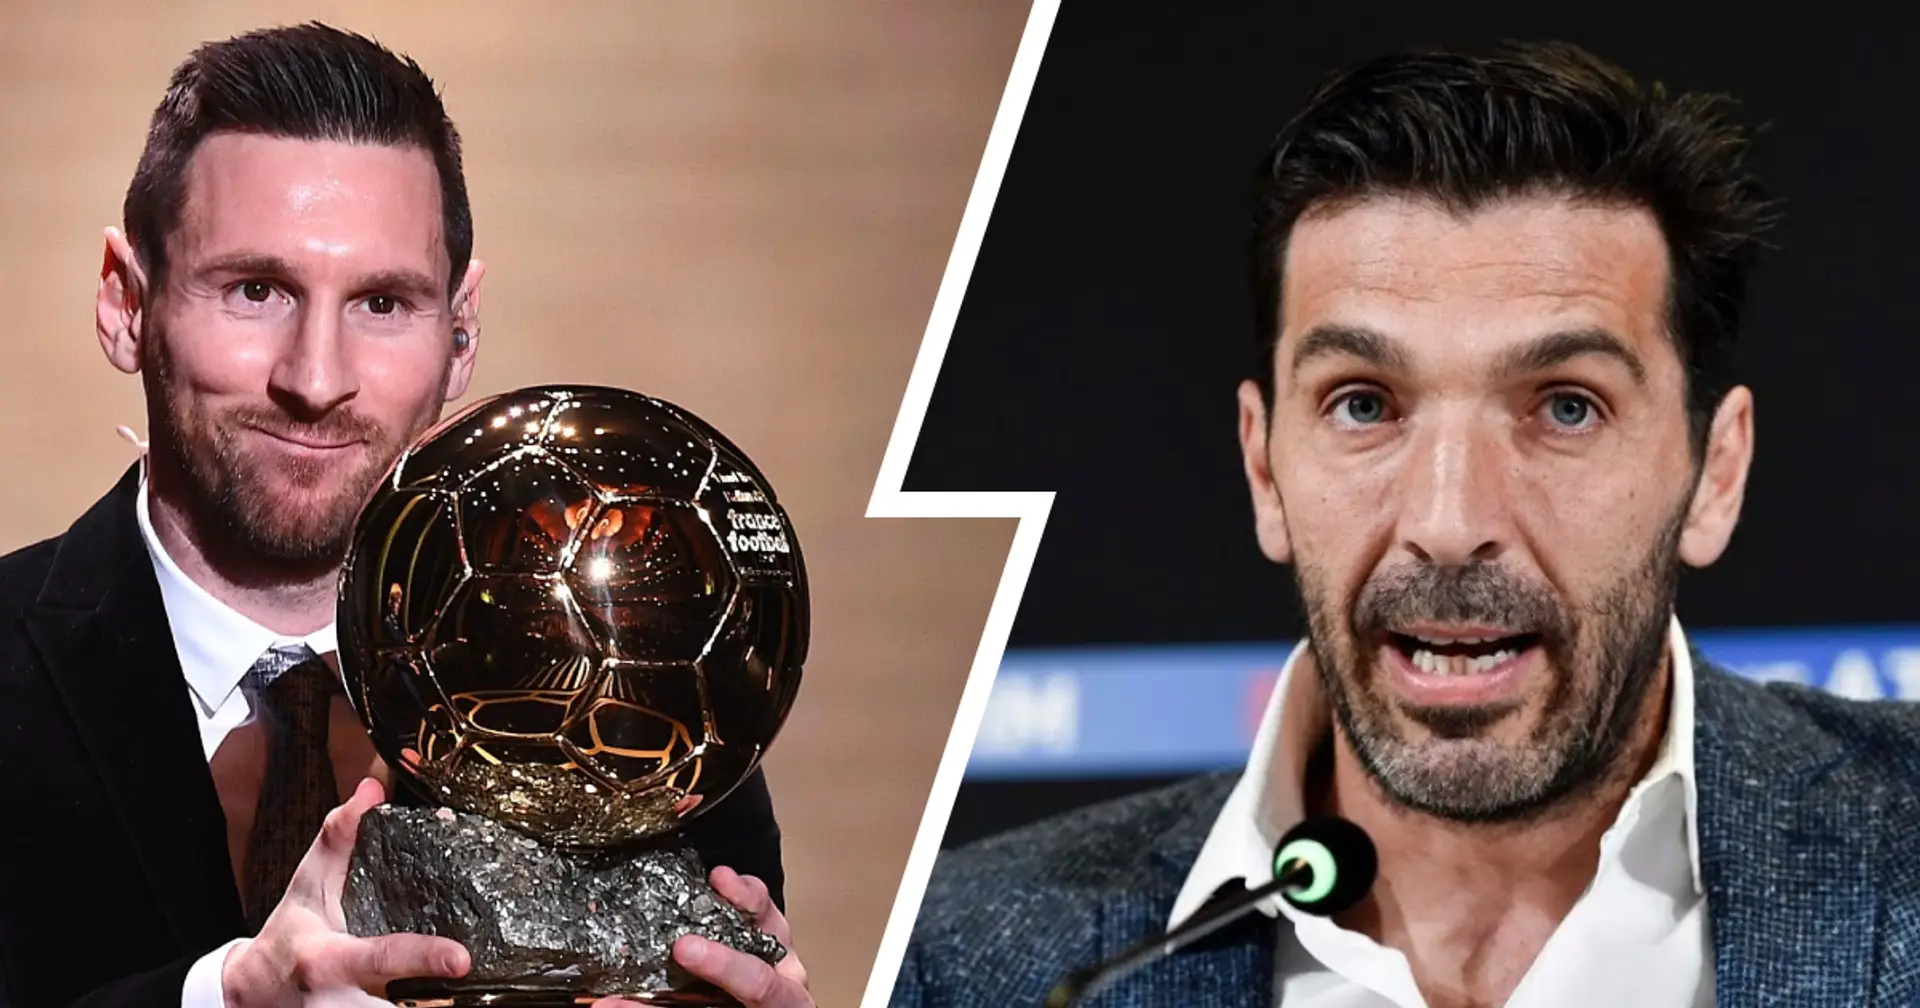 'Didn’t the journalists notice?': Gianluigi Buffon disappointed at missing Ballon d'Or 2003